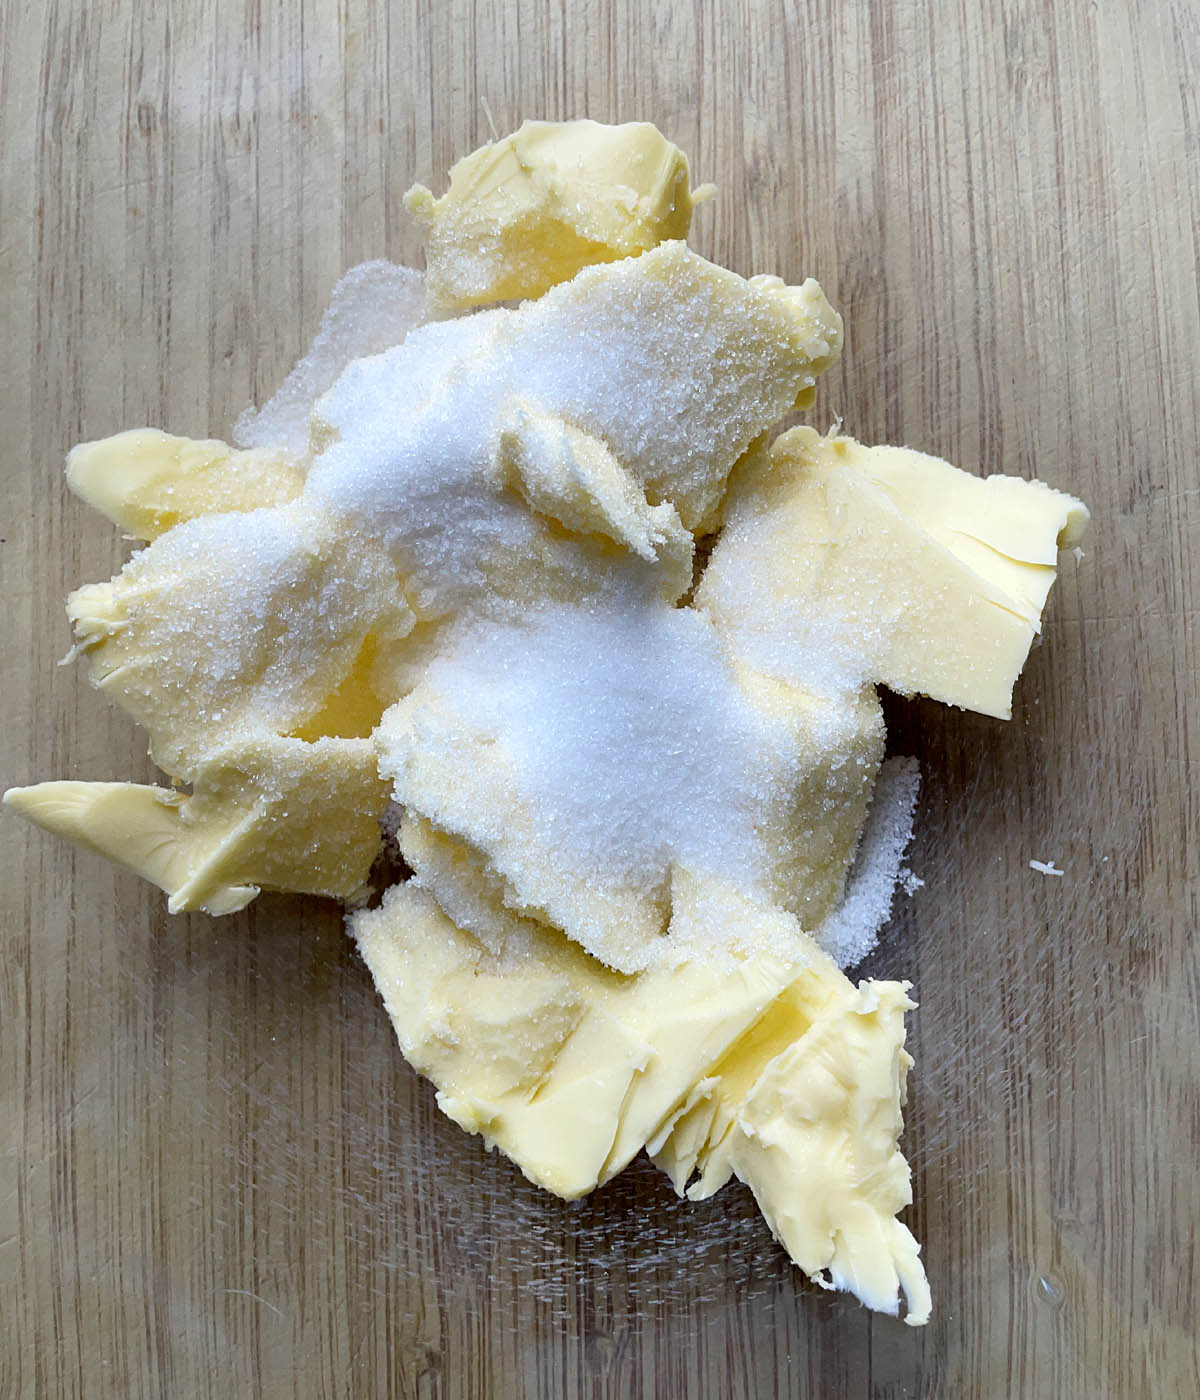 White sugar and yellow butter chunks in a glass bowl on a wooden cutting board.